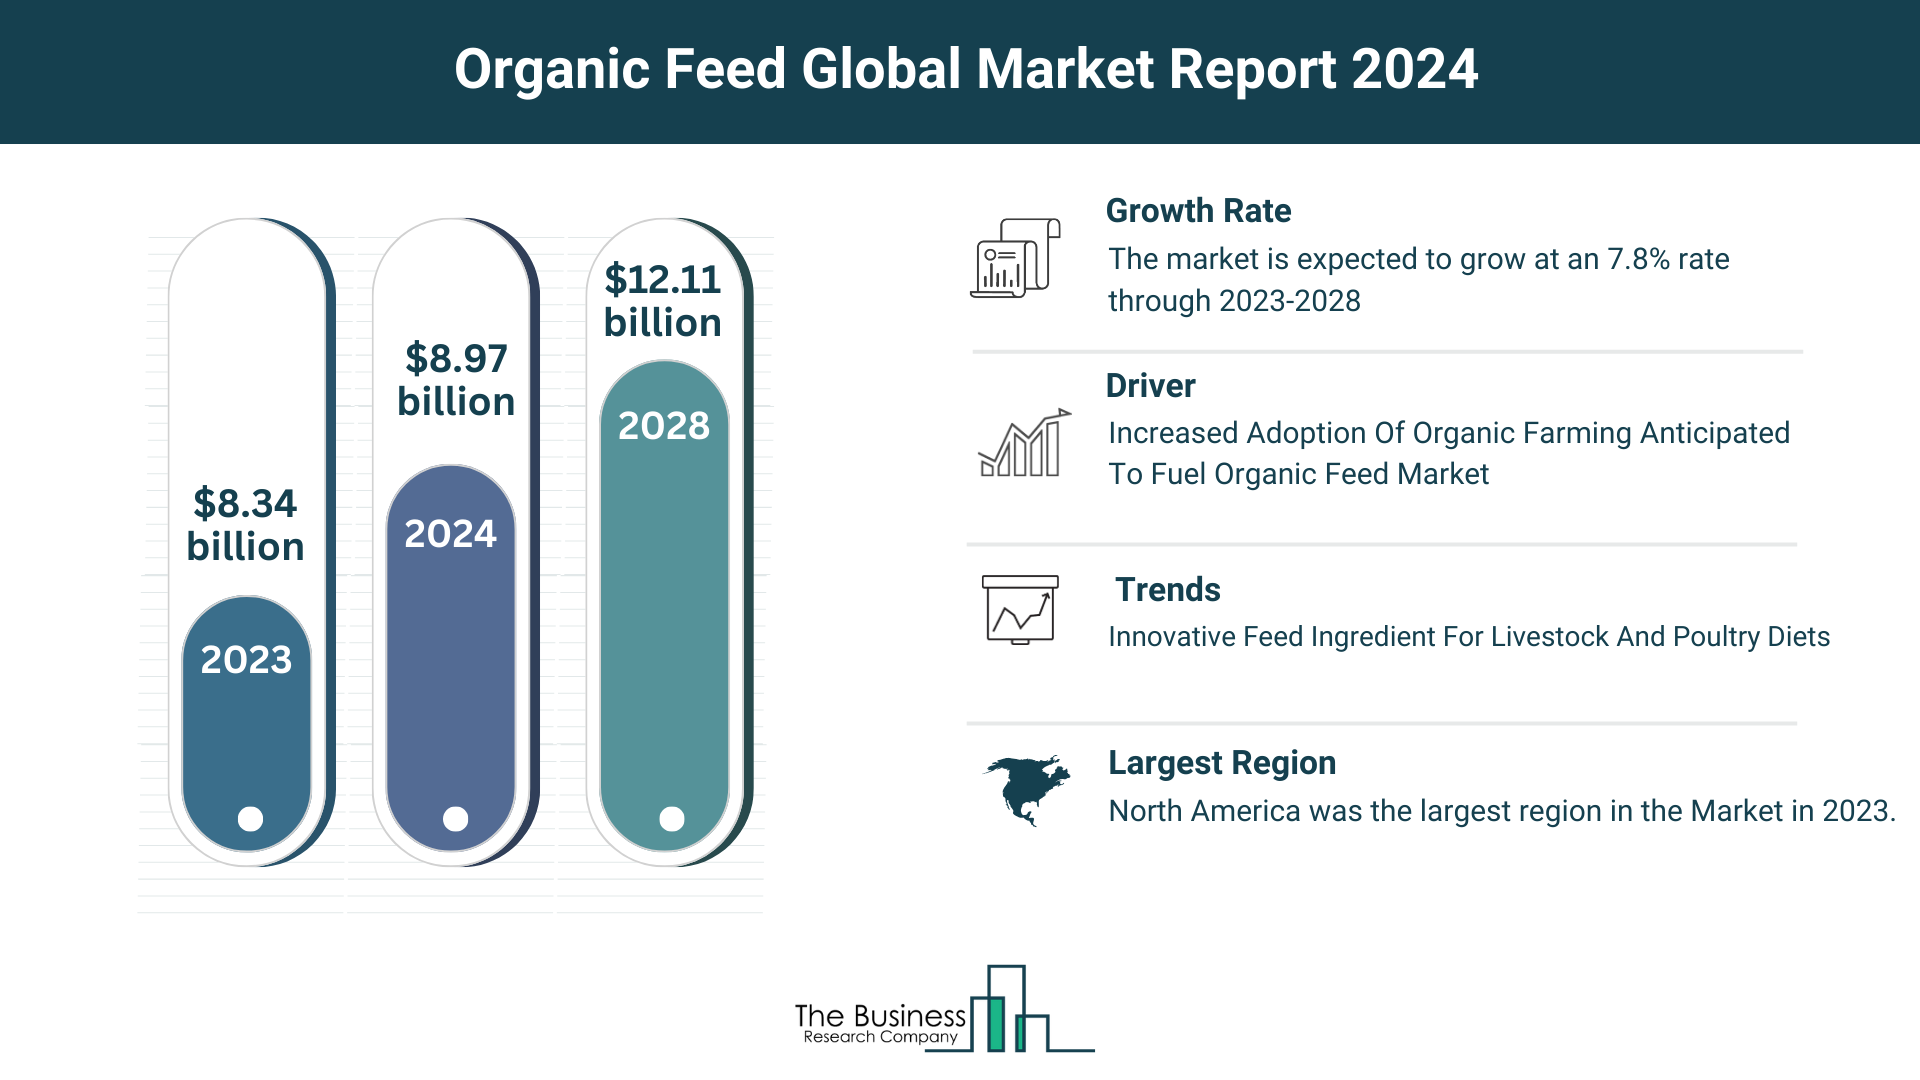 How Is the Organic Feed Market Expected To Grow Through 2024-2033?